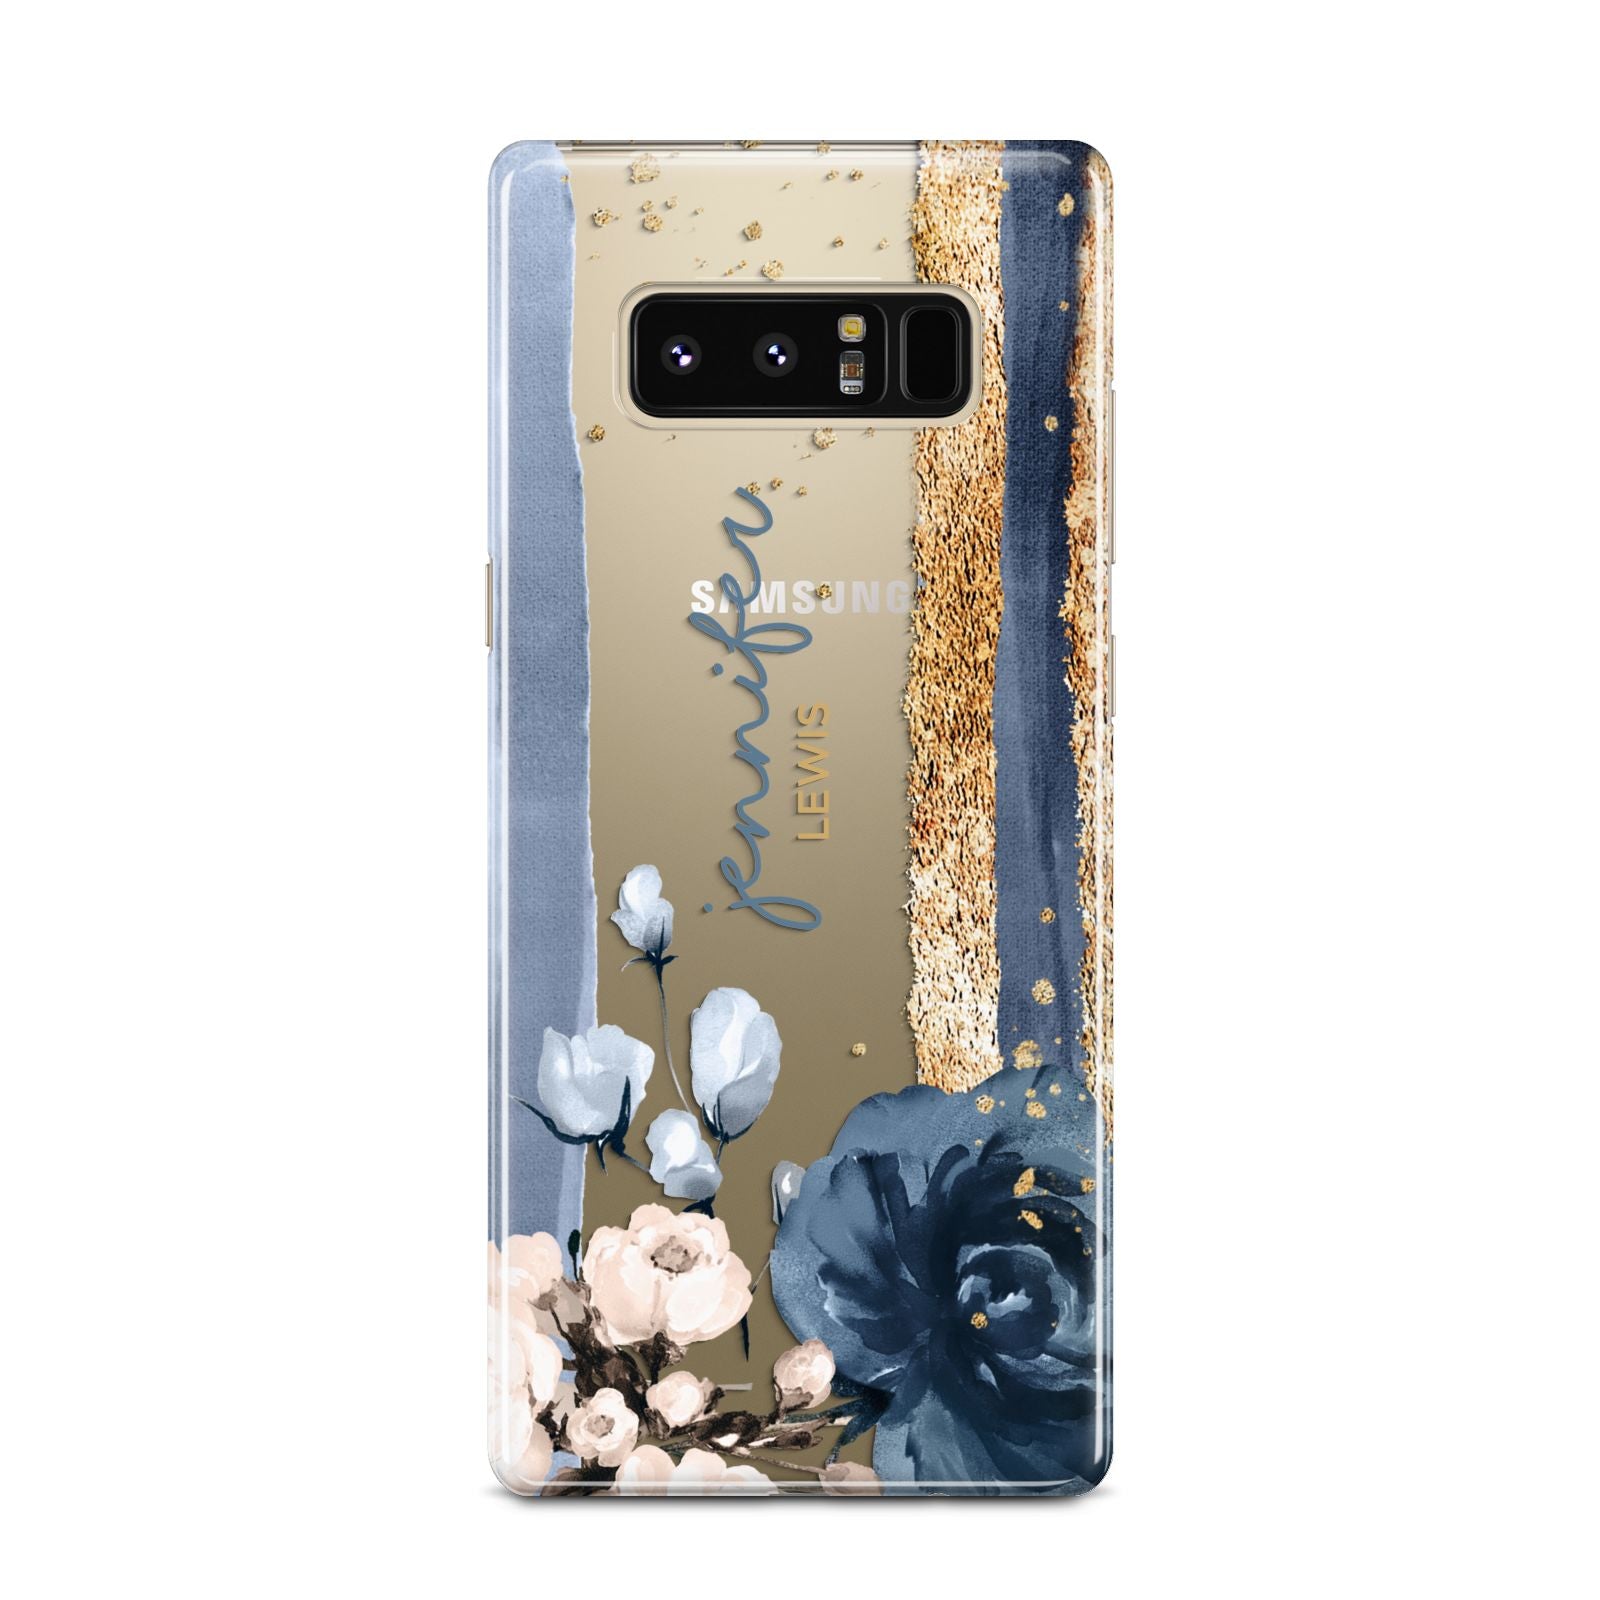 Personalised Blue Gold Name Samsung Galaxy Note 8 Case